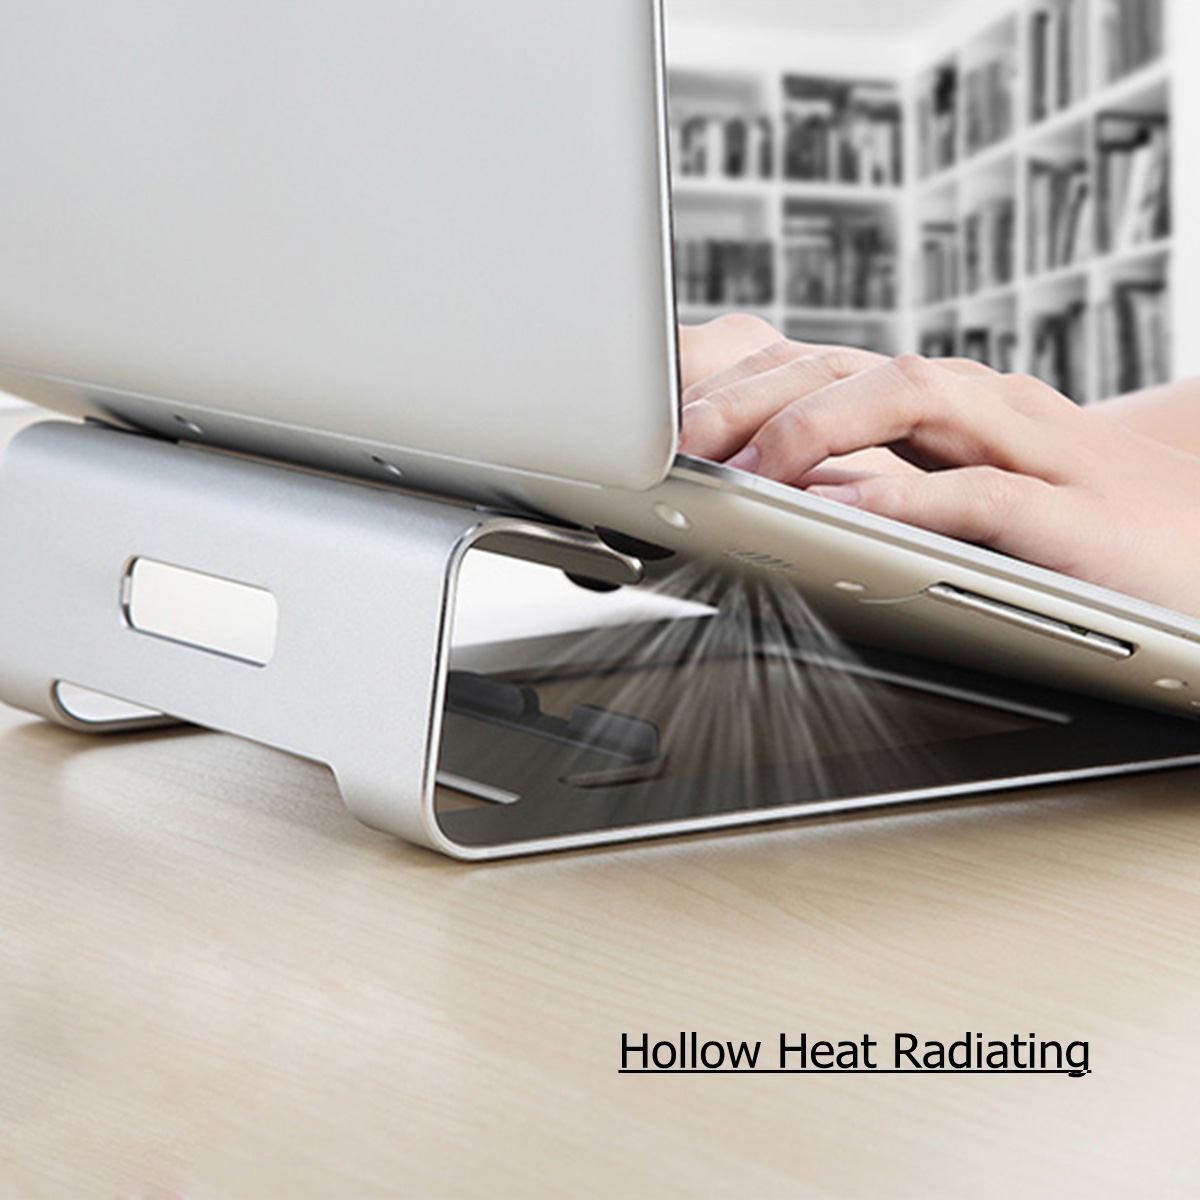 Universal-Aluminum-Alloy-Heat-Dissipation-Laptop-Stand-Tablet-Holder-for-Macbook-iPad--iPhone-1165837-1